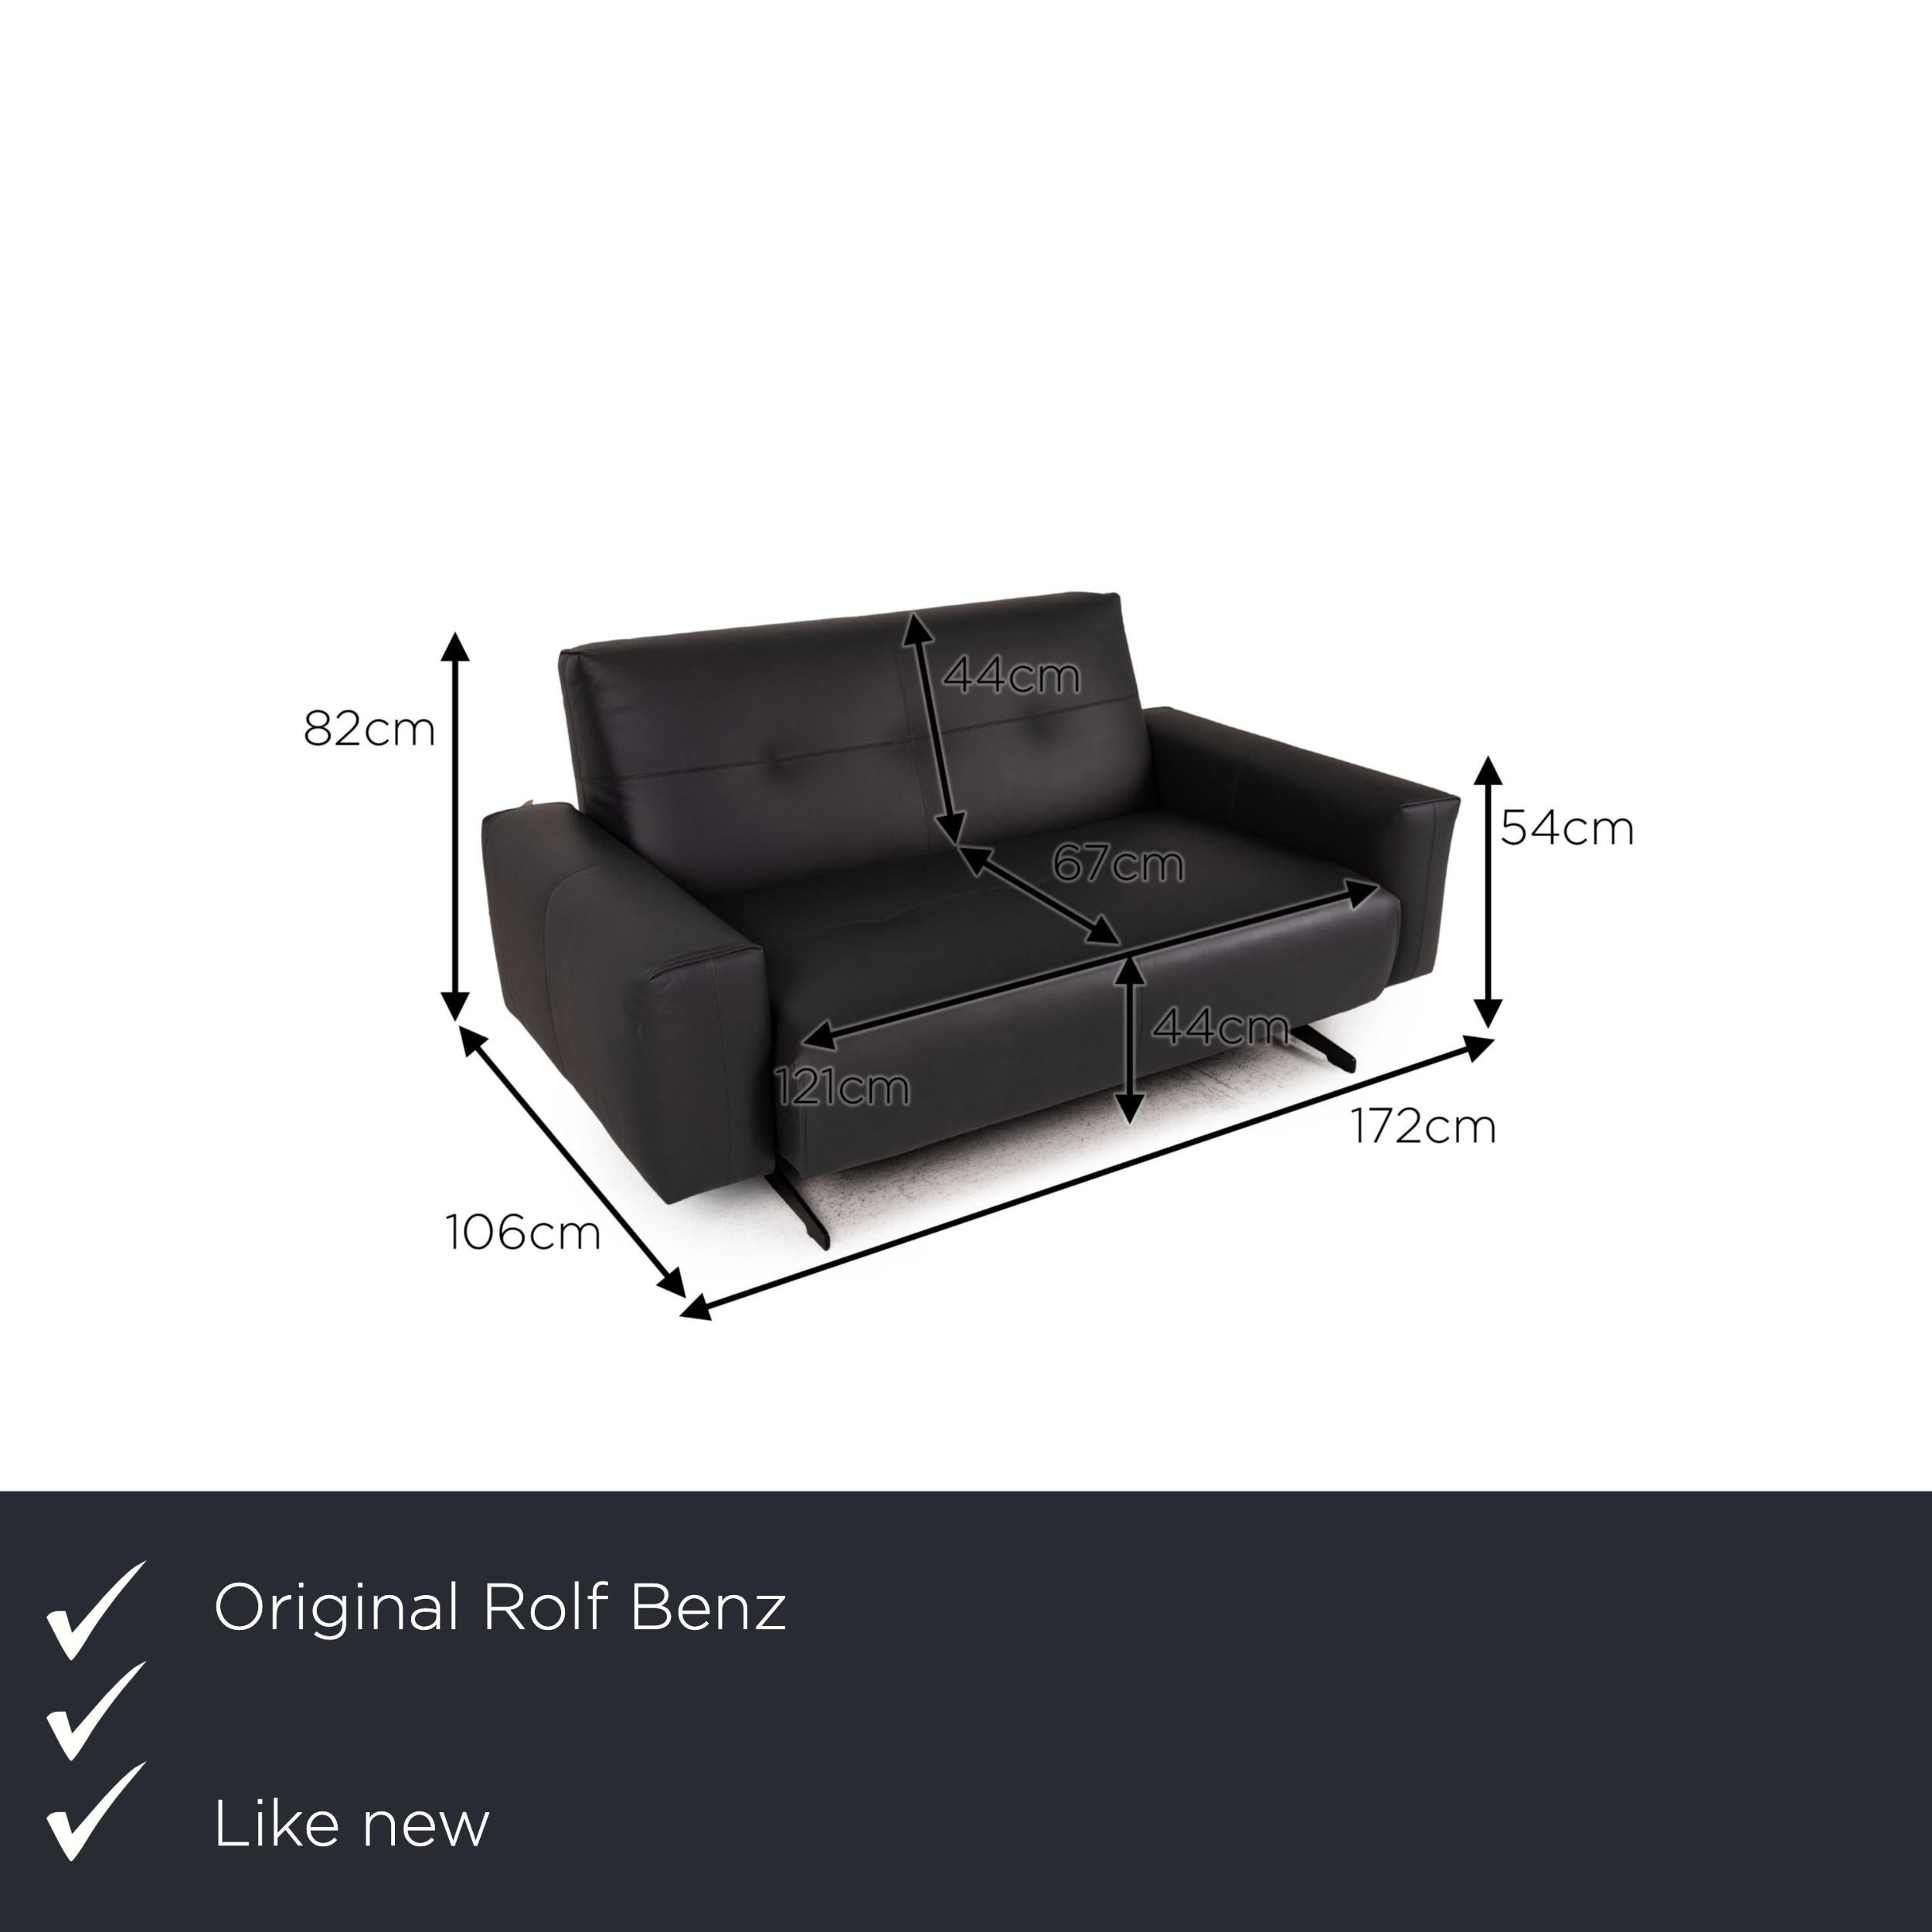 We present to you a Rolf Benz 50 leather sofa black two-seater couch.

Product measurements in centimeters:

depth: 106
width: 172
height: 82
seat height: 44
rest height: 54
seat depth: 67
seat width: 121
back height: 44.

 